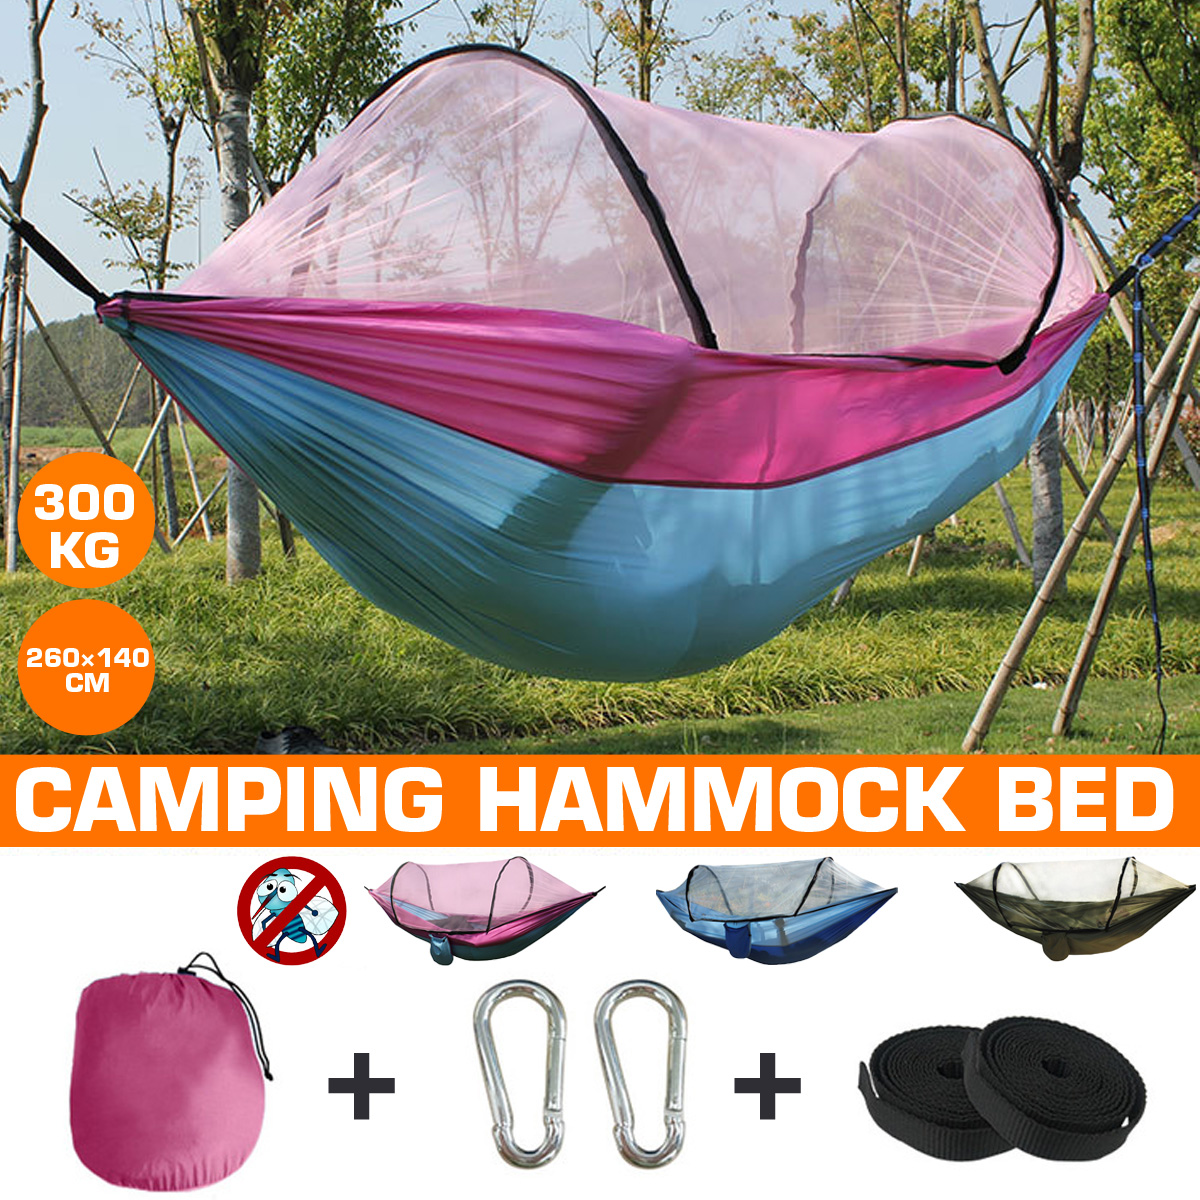 1-2-People-Camping-Hammock-with-Mosquito-Net-Lightweight-Hanging-Bed-Beach-Travel-Max-Load-300kg-1697049-1